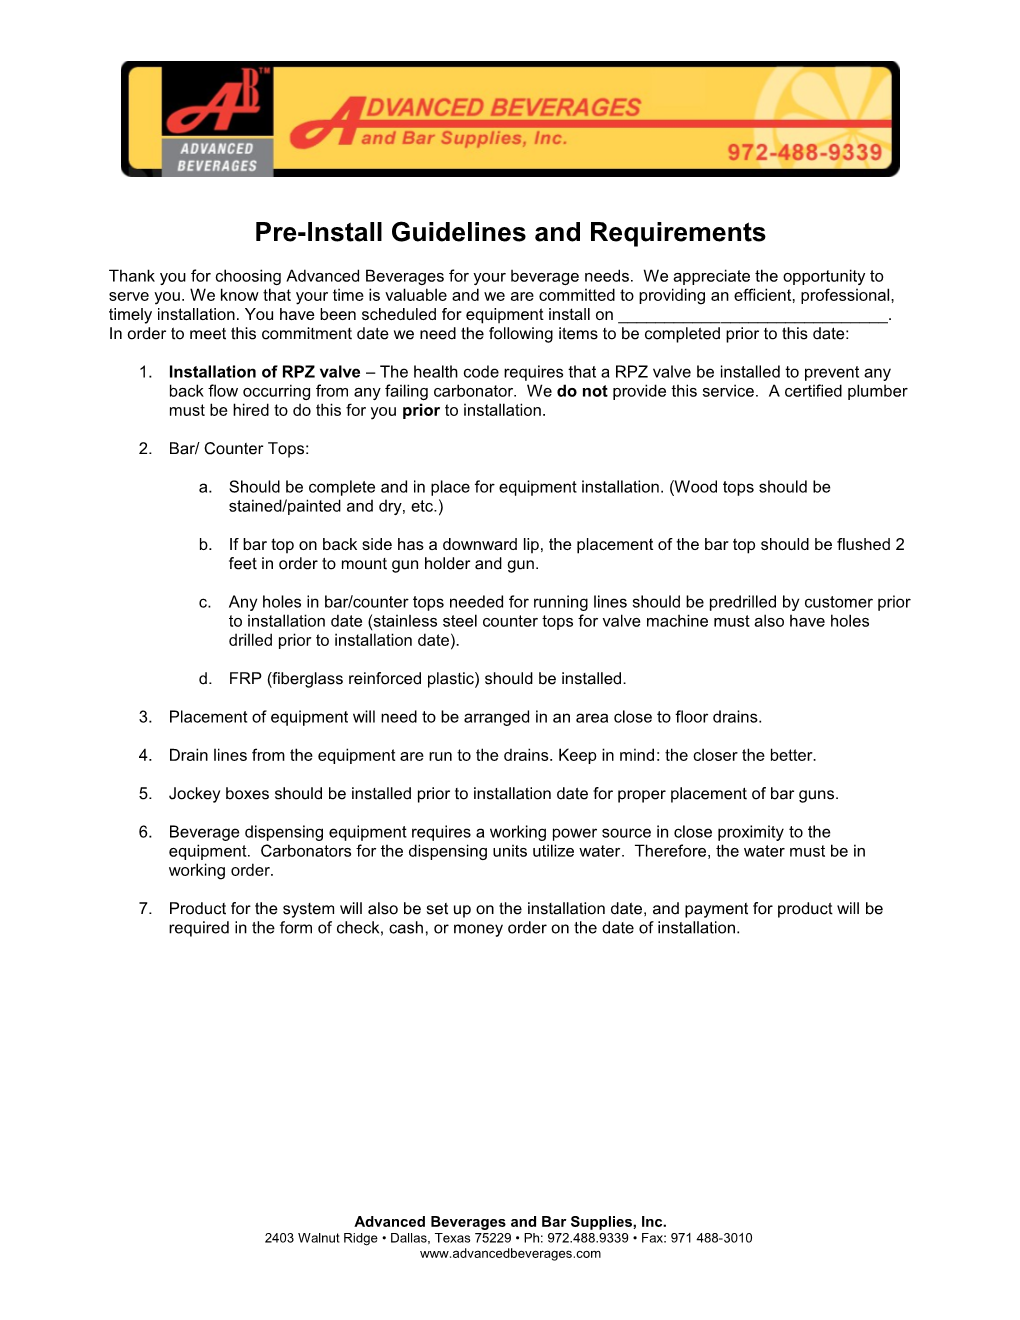 Preinstall Guidelines and Requirements